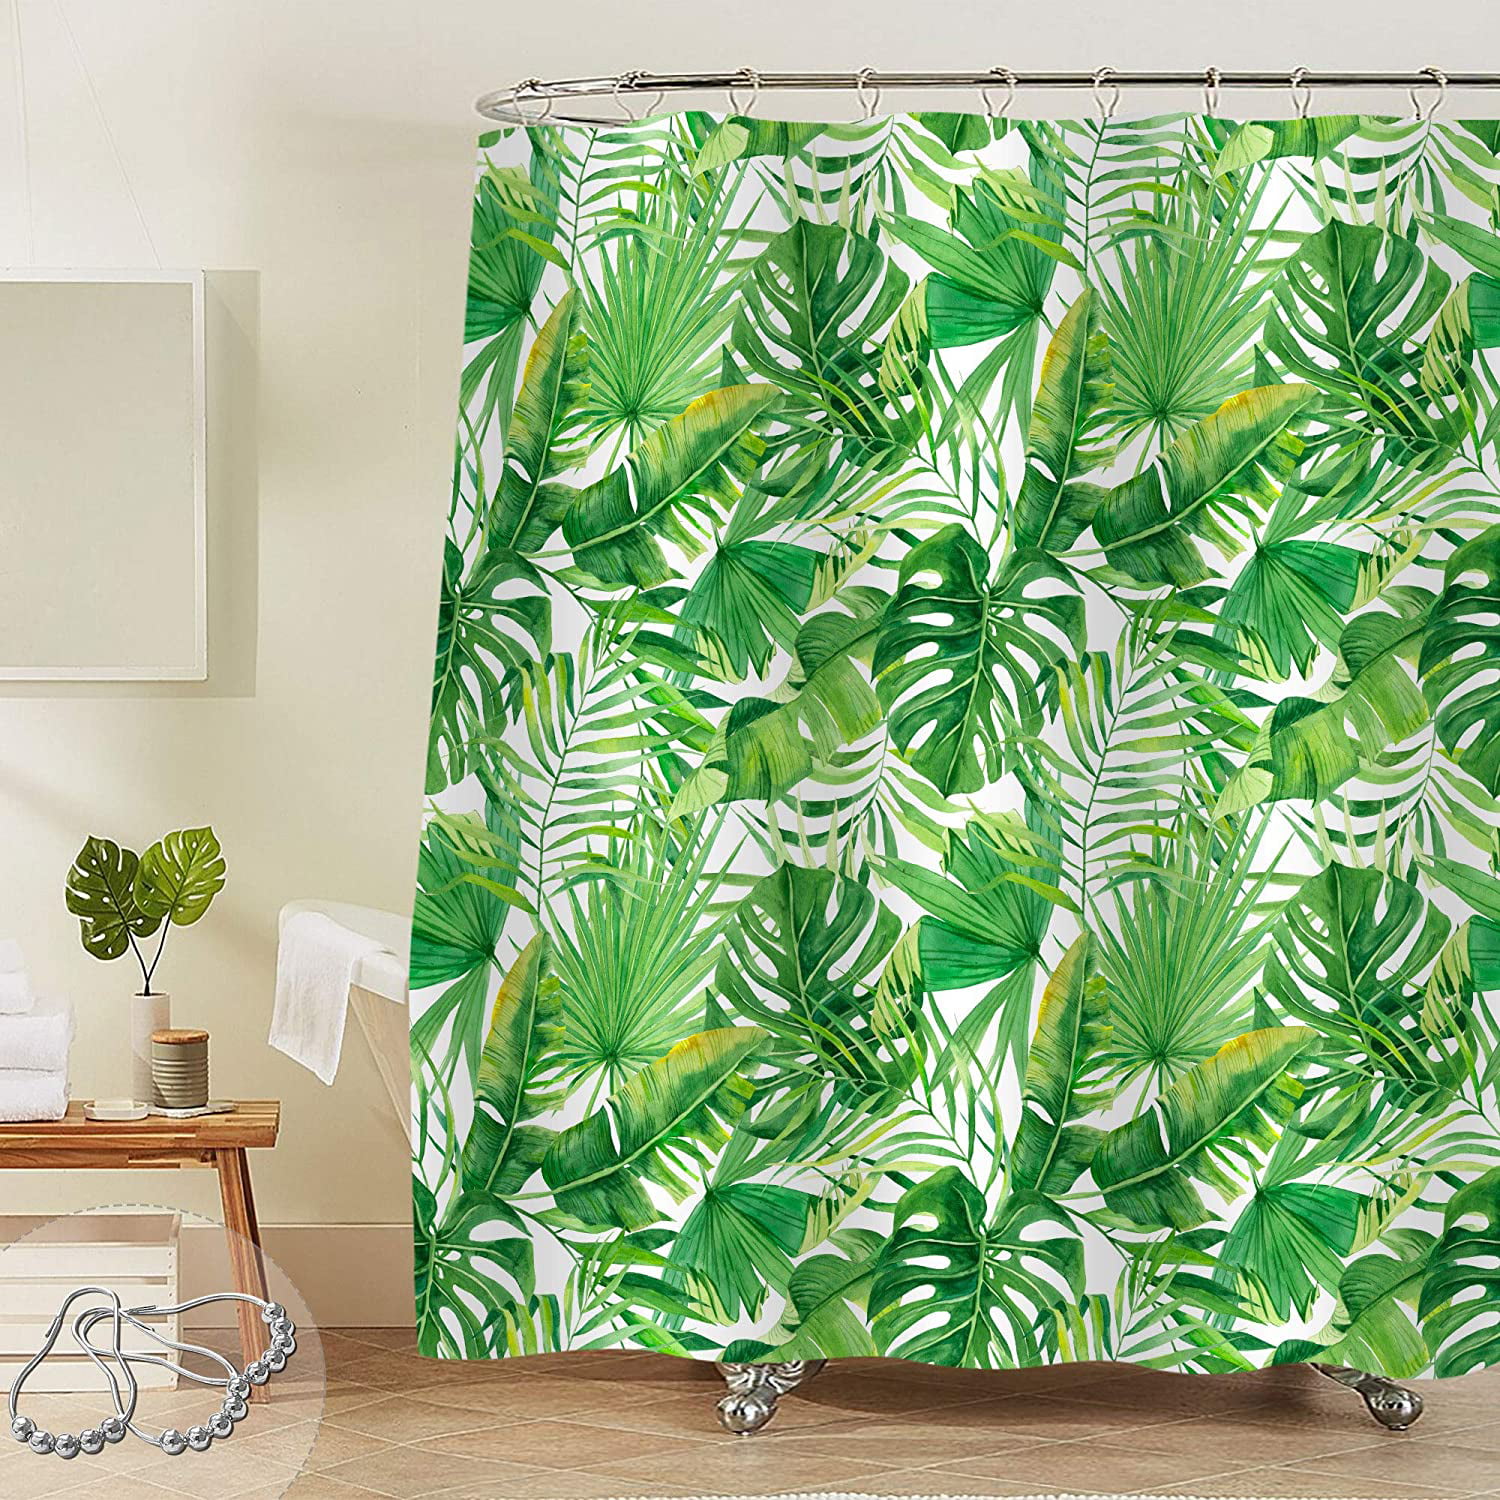 Banana leaves and palm leaves Waterproof Fabric Home Decor Shower Curtain NEW 